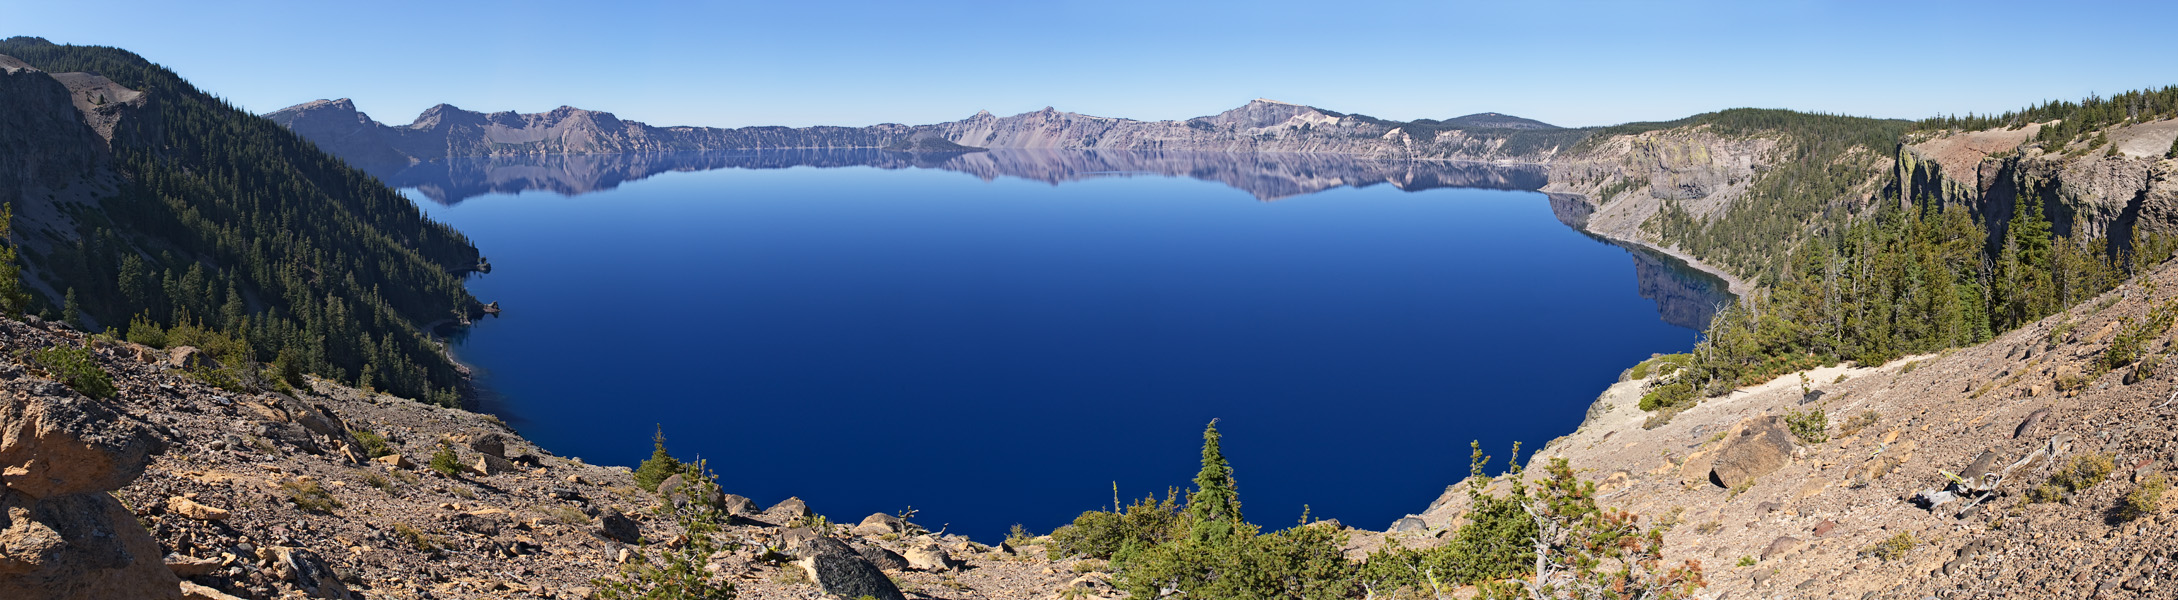 Crater Lake from the Northeast